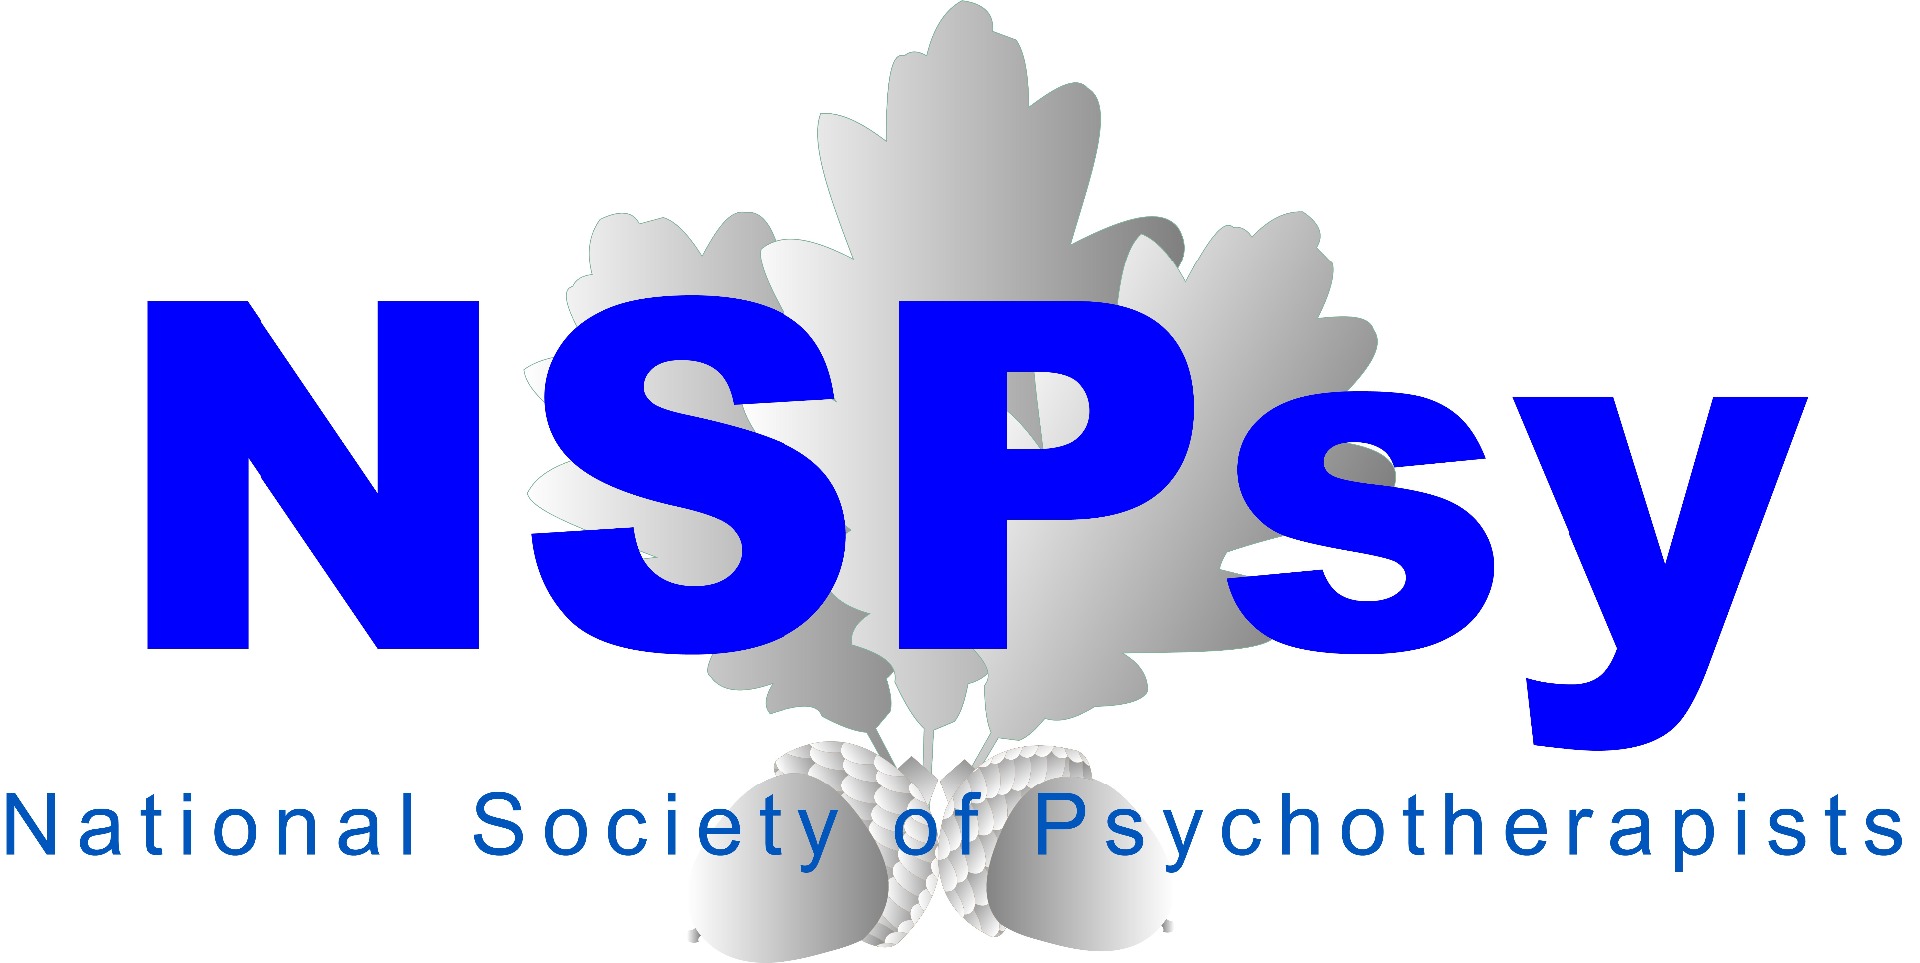 NSPsy supporting hypnotherapists in Berkshire practice